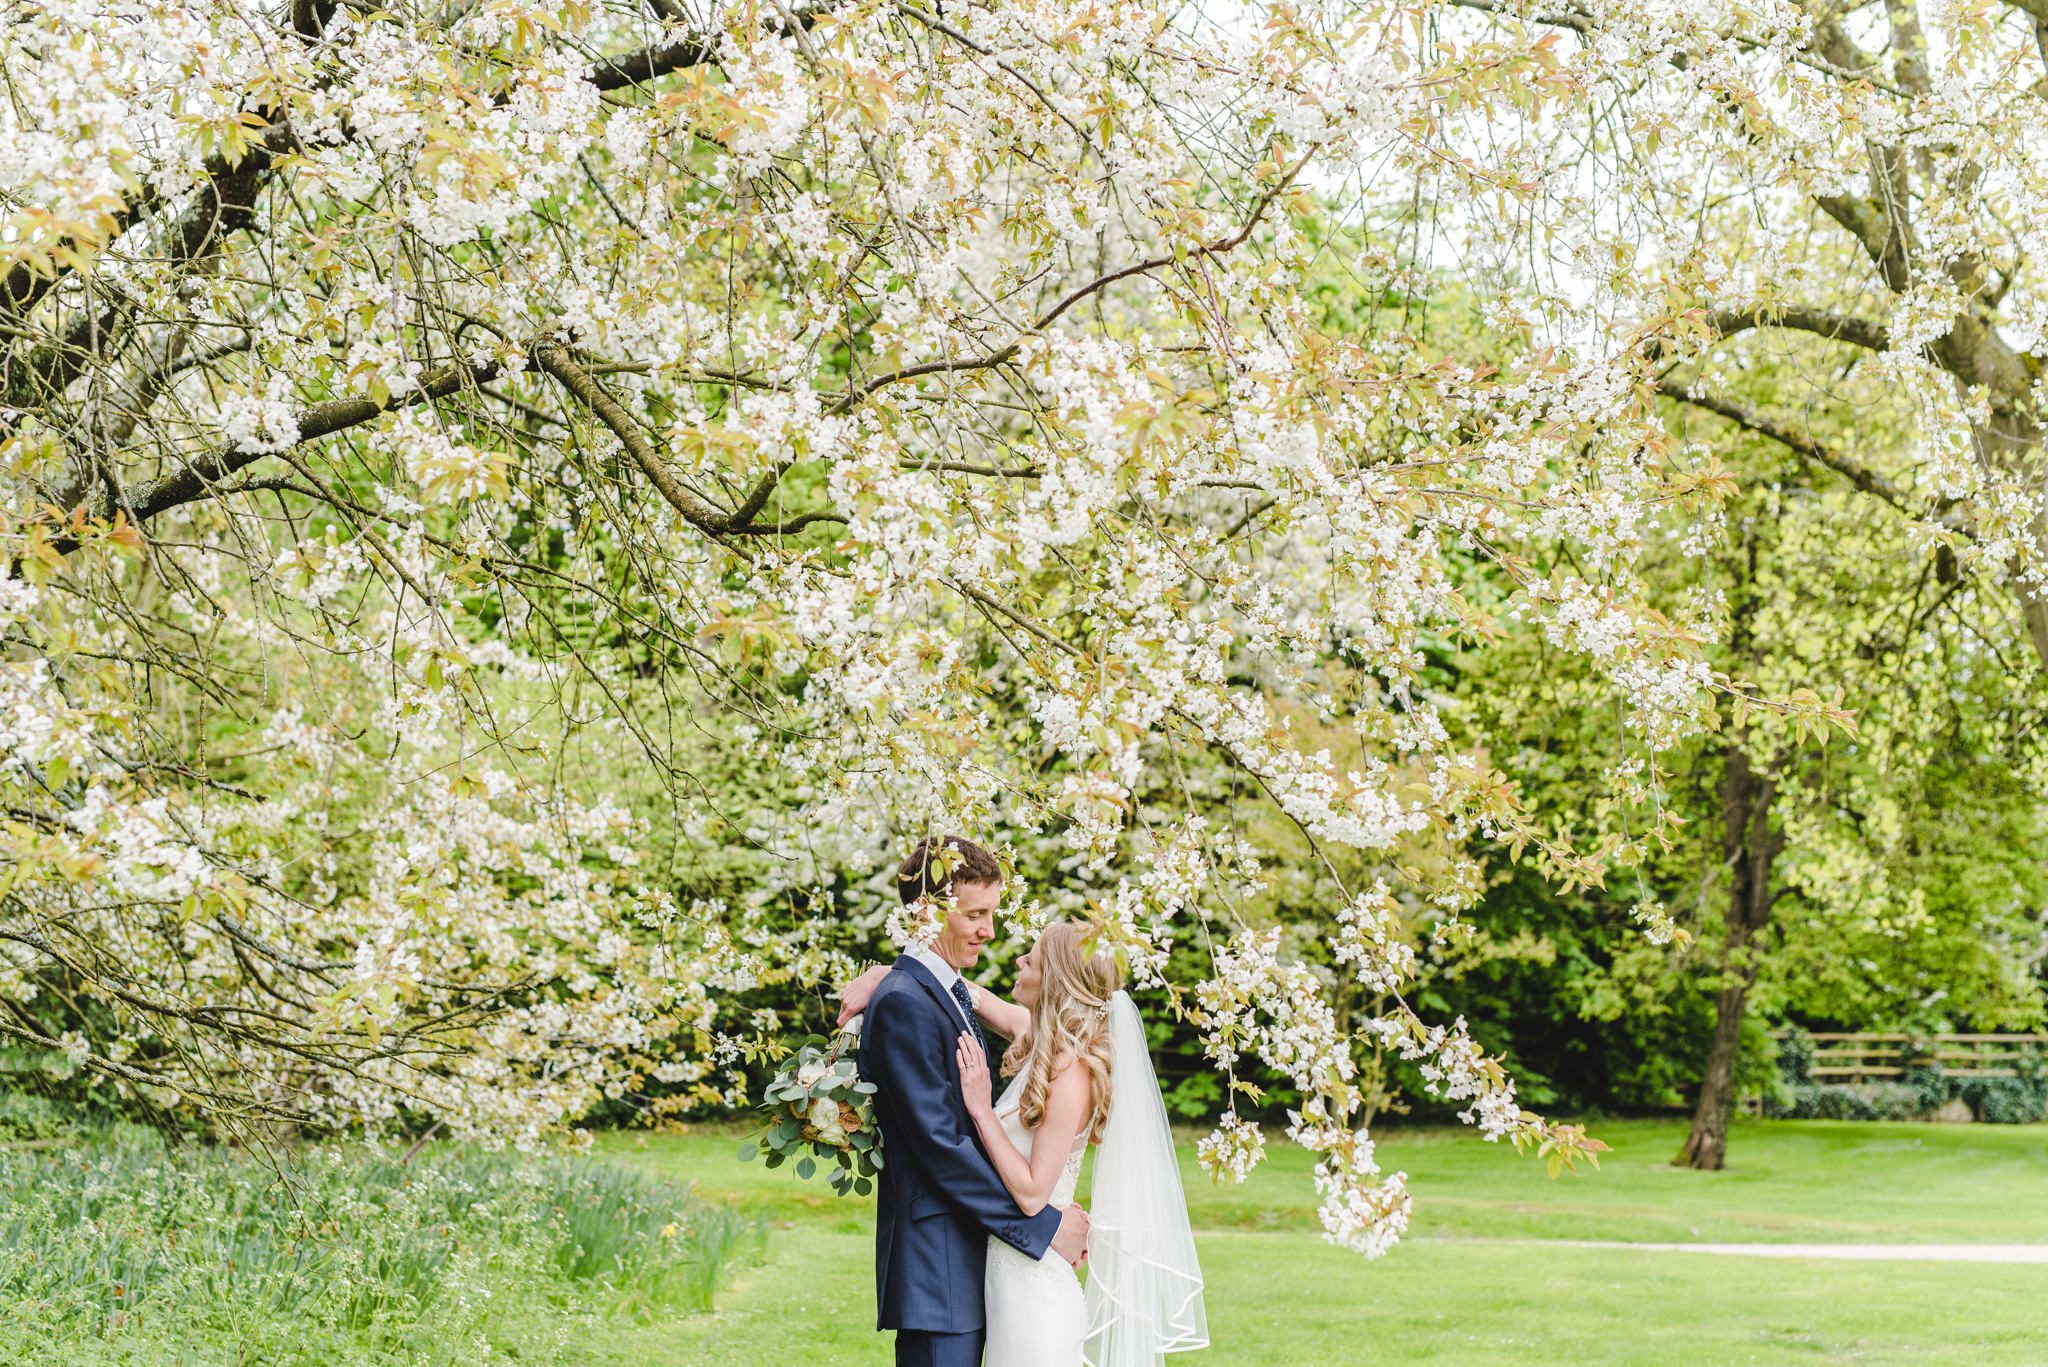 Bride and Groom wedding portraits by Bigeye Photography at Elmore Court